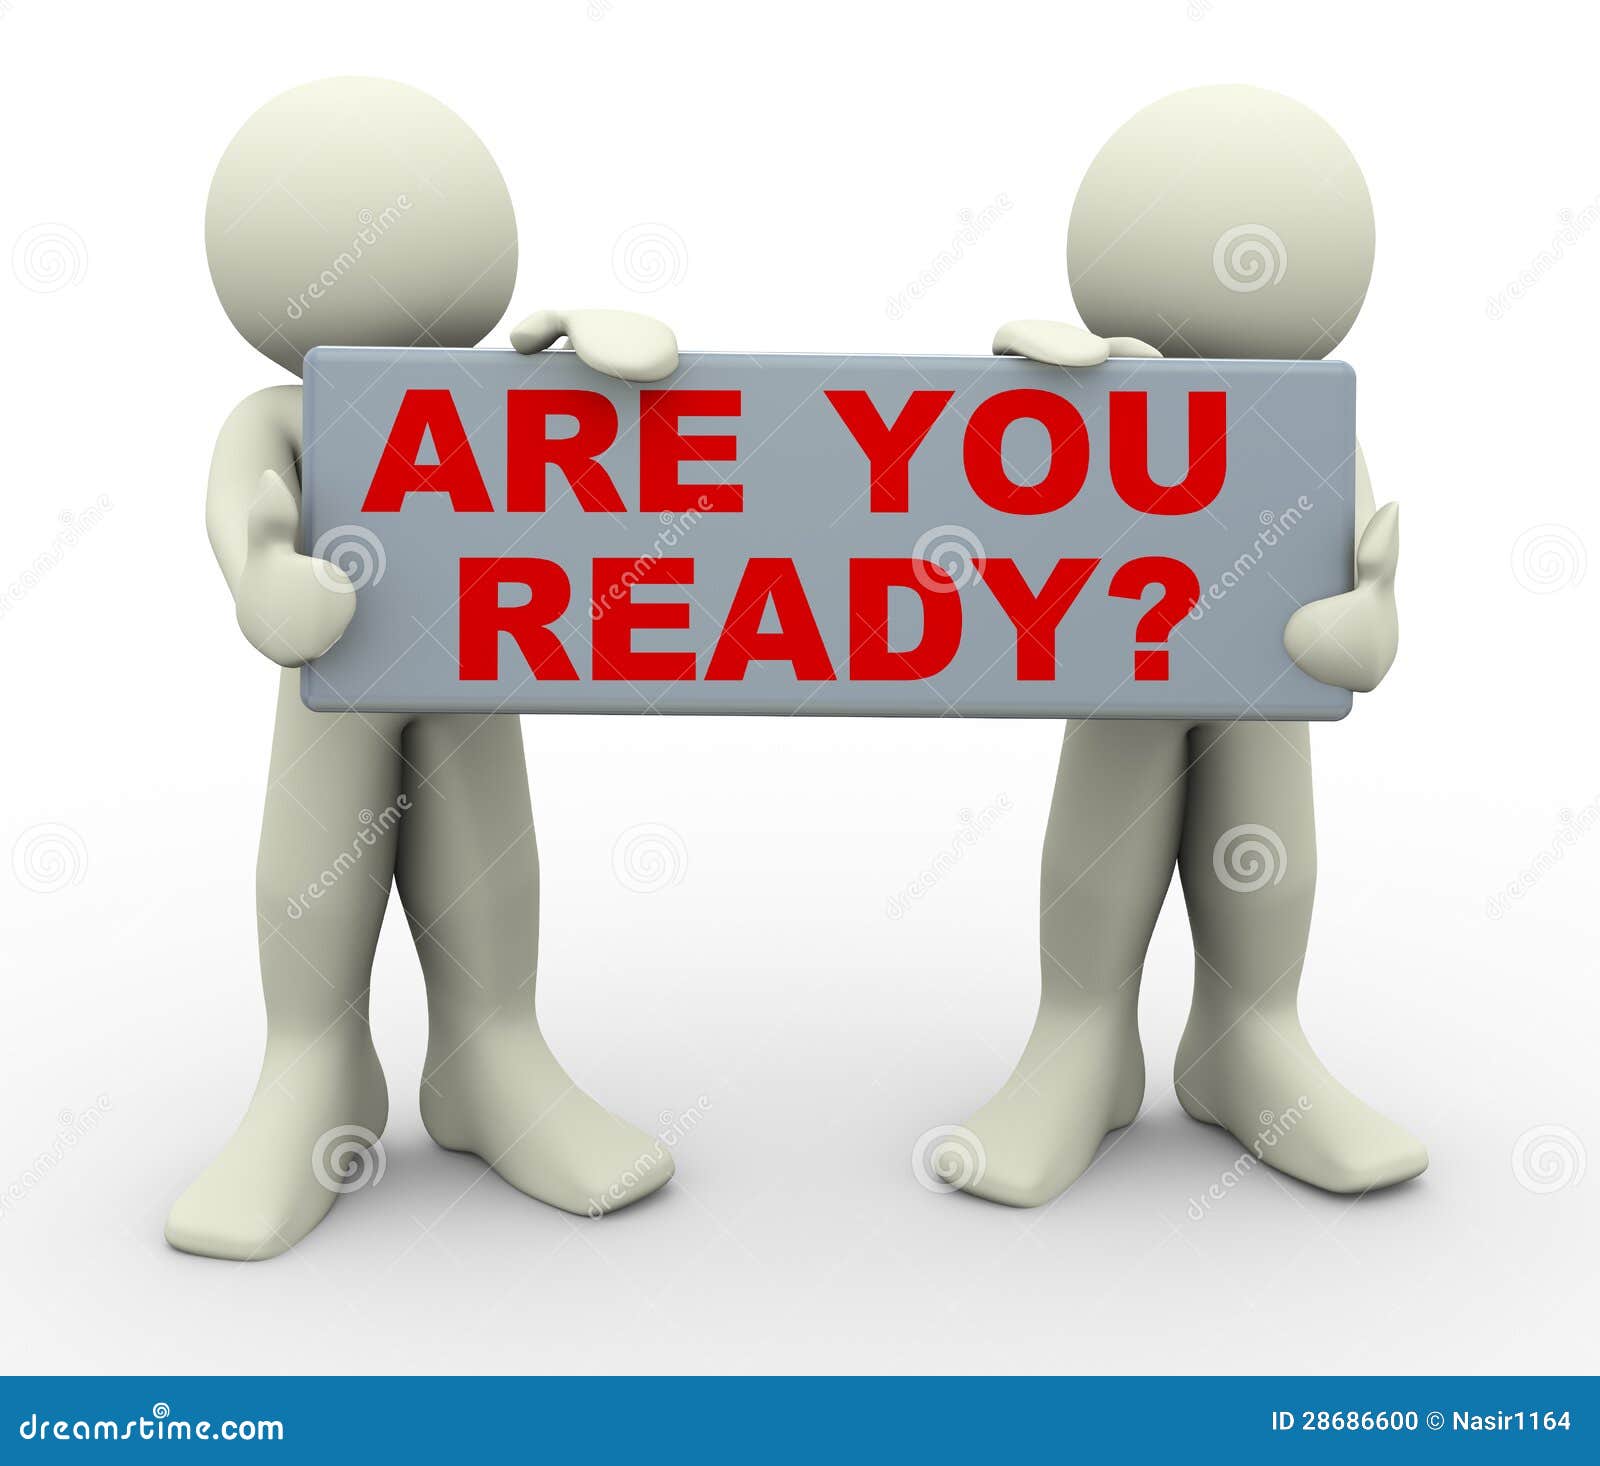 clip art are you ready - photo #33